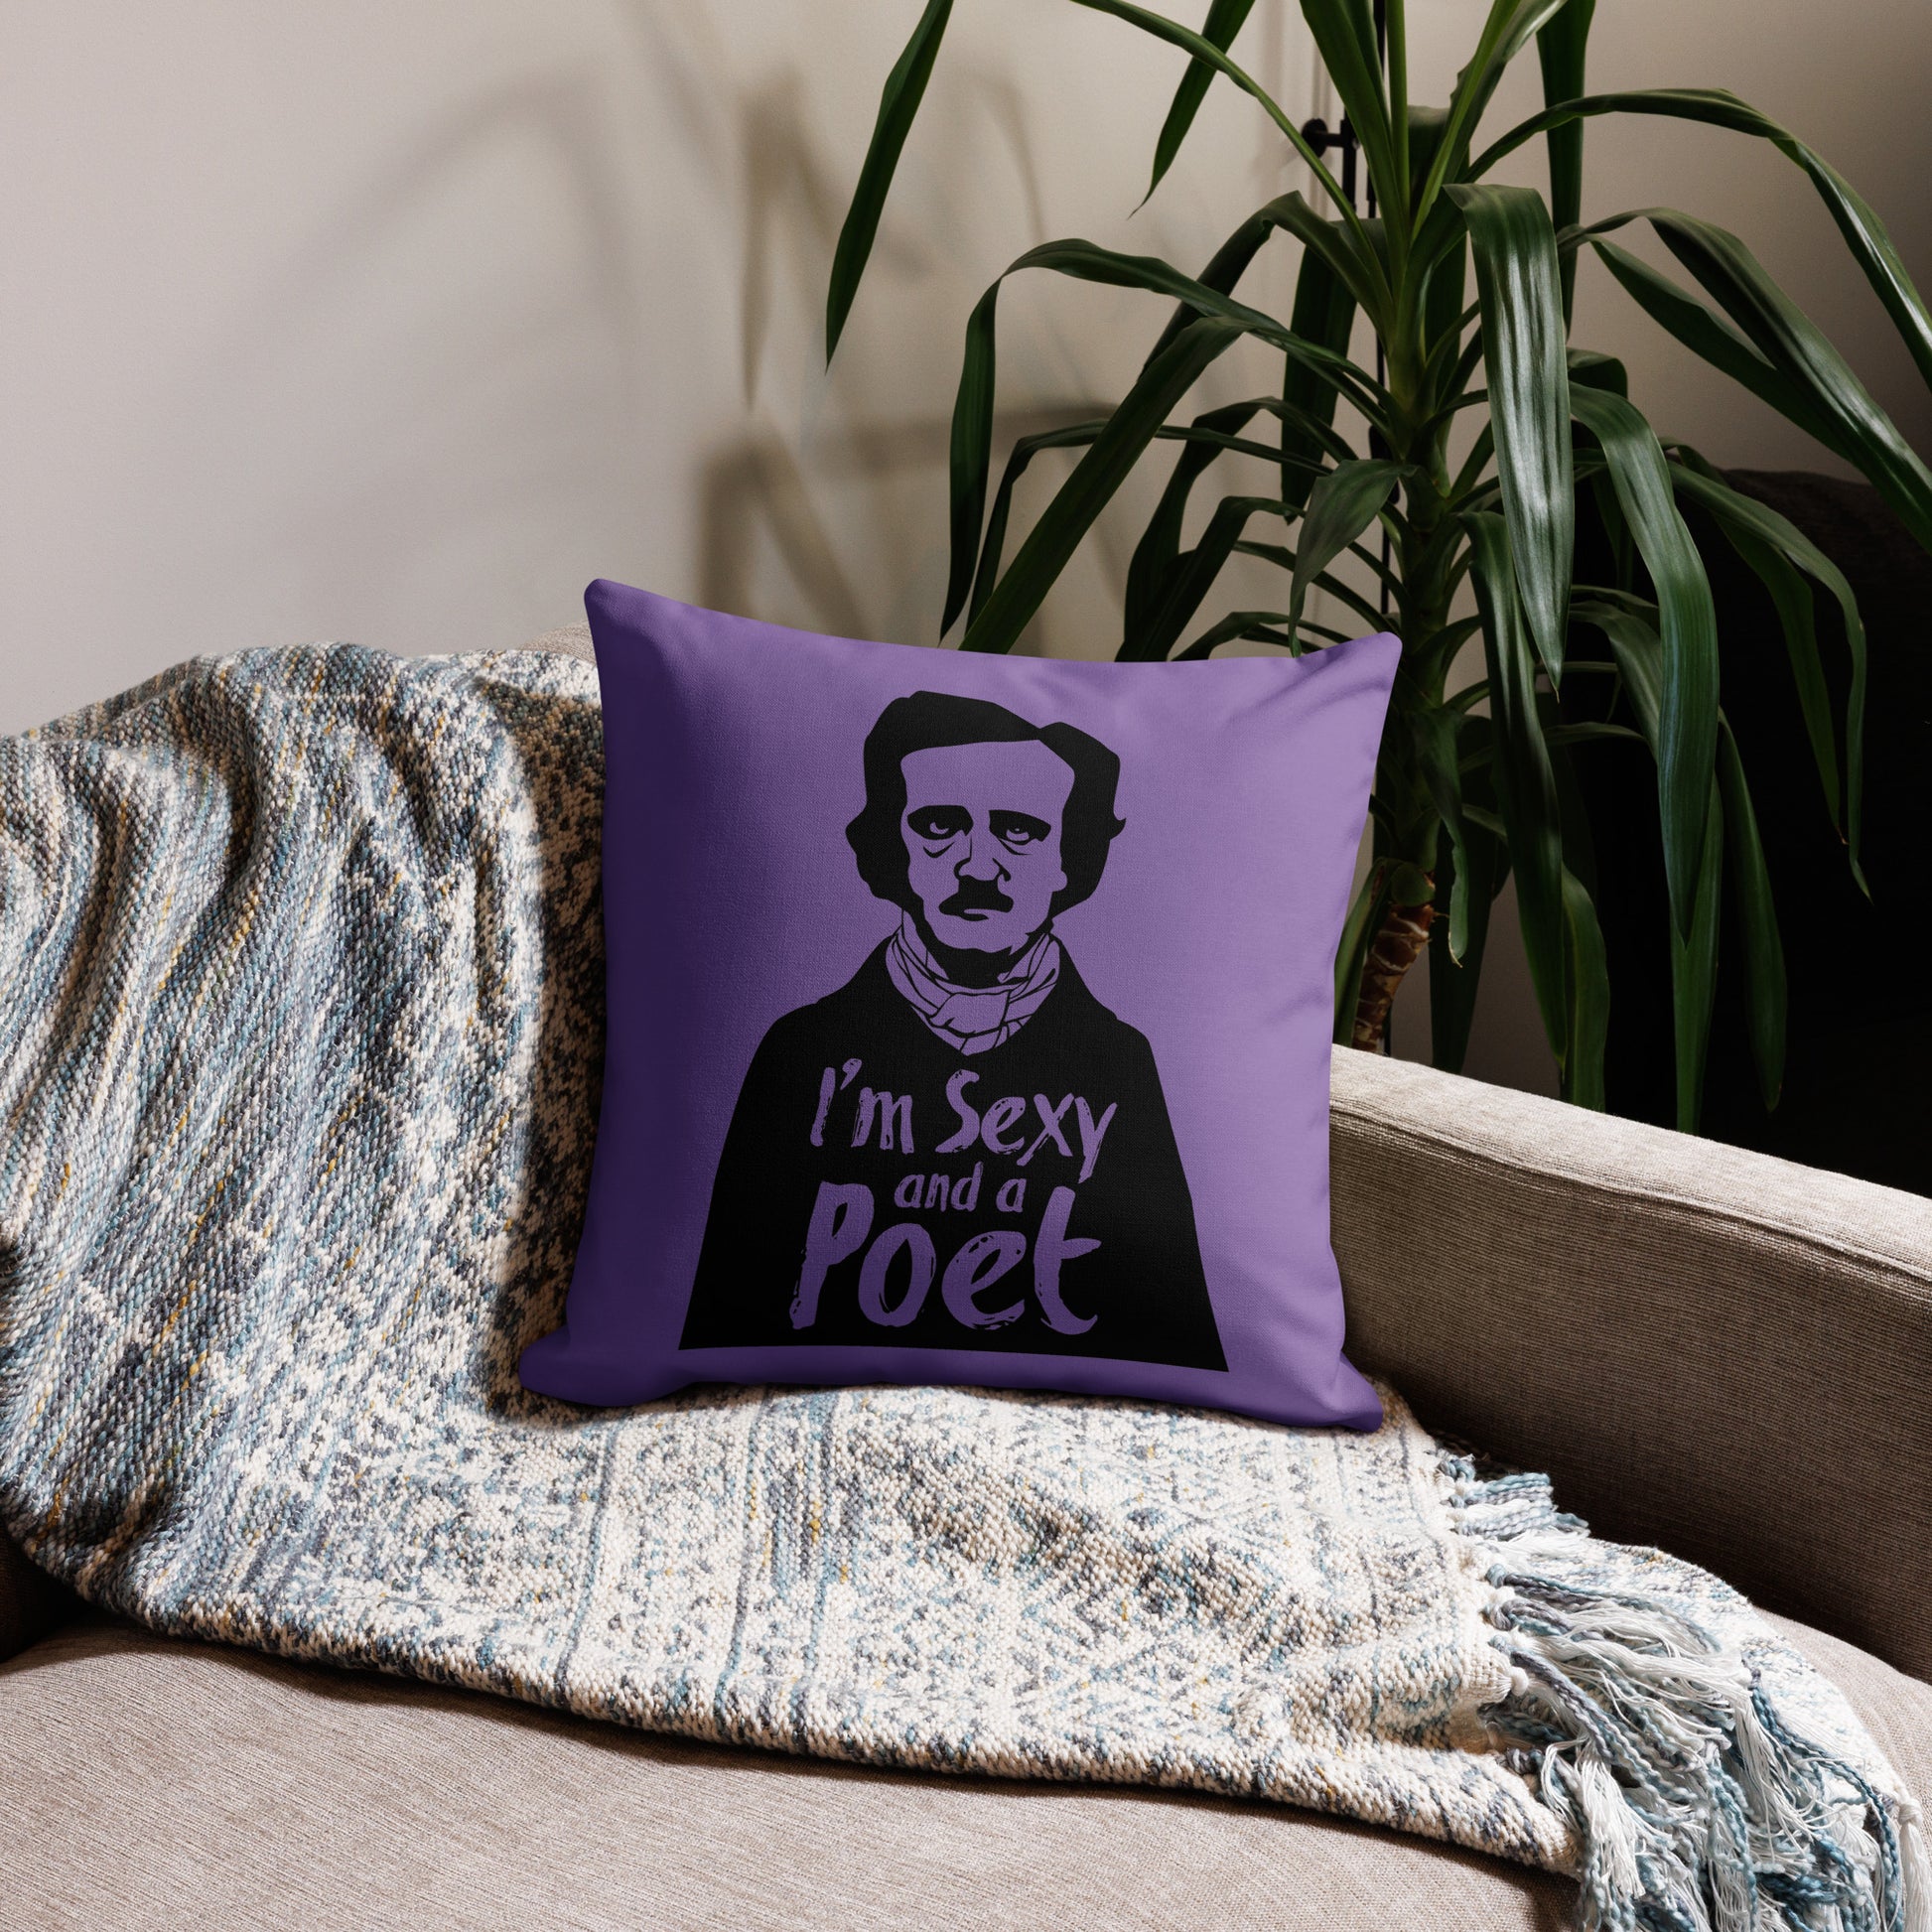 Products Edgar Allan Poe "I'm Sexy and a Poet" Premium Pillow - Purple18 x 18